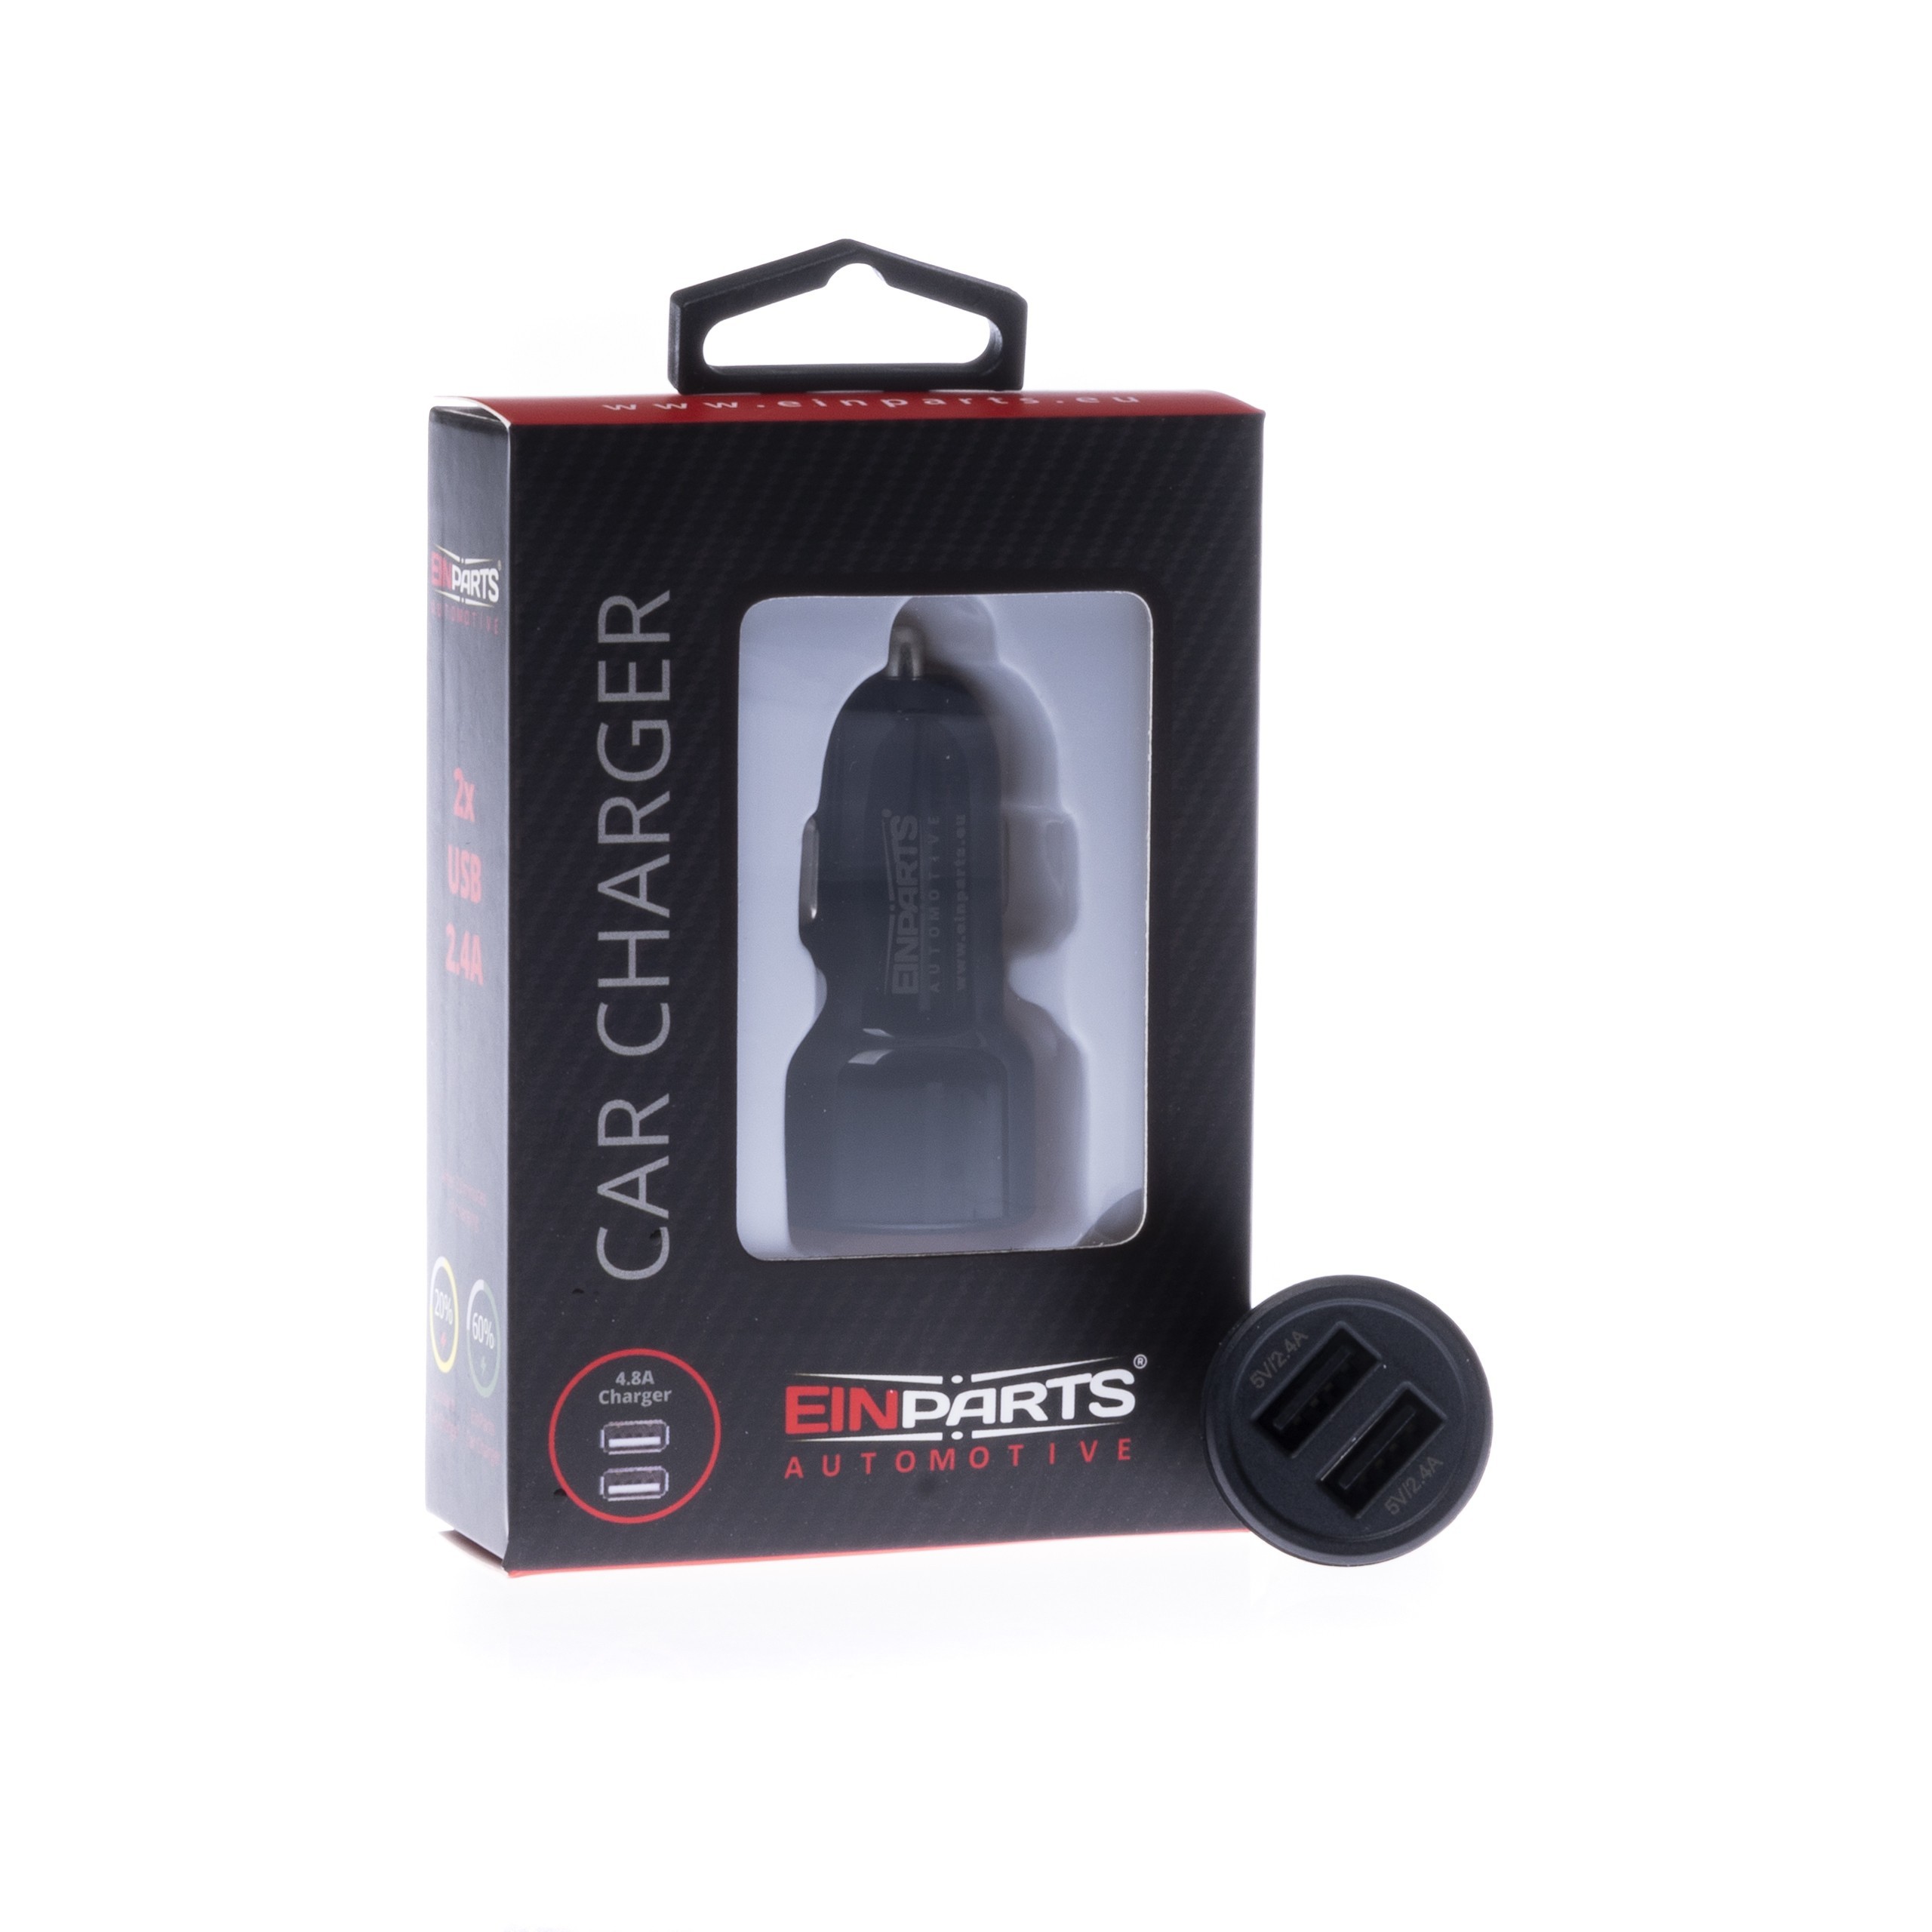 EPACC010 QUICK CAR CHARGER 4.8A